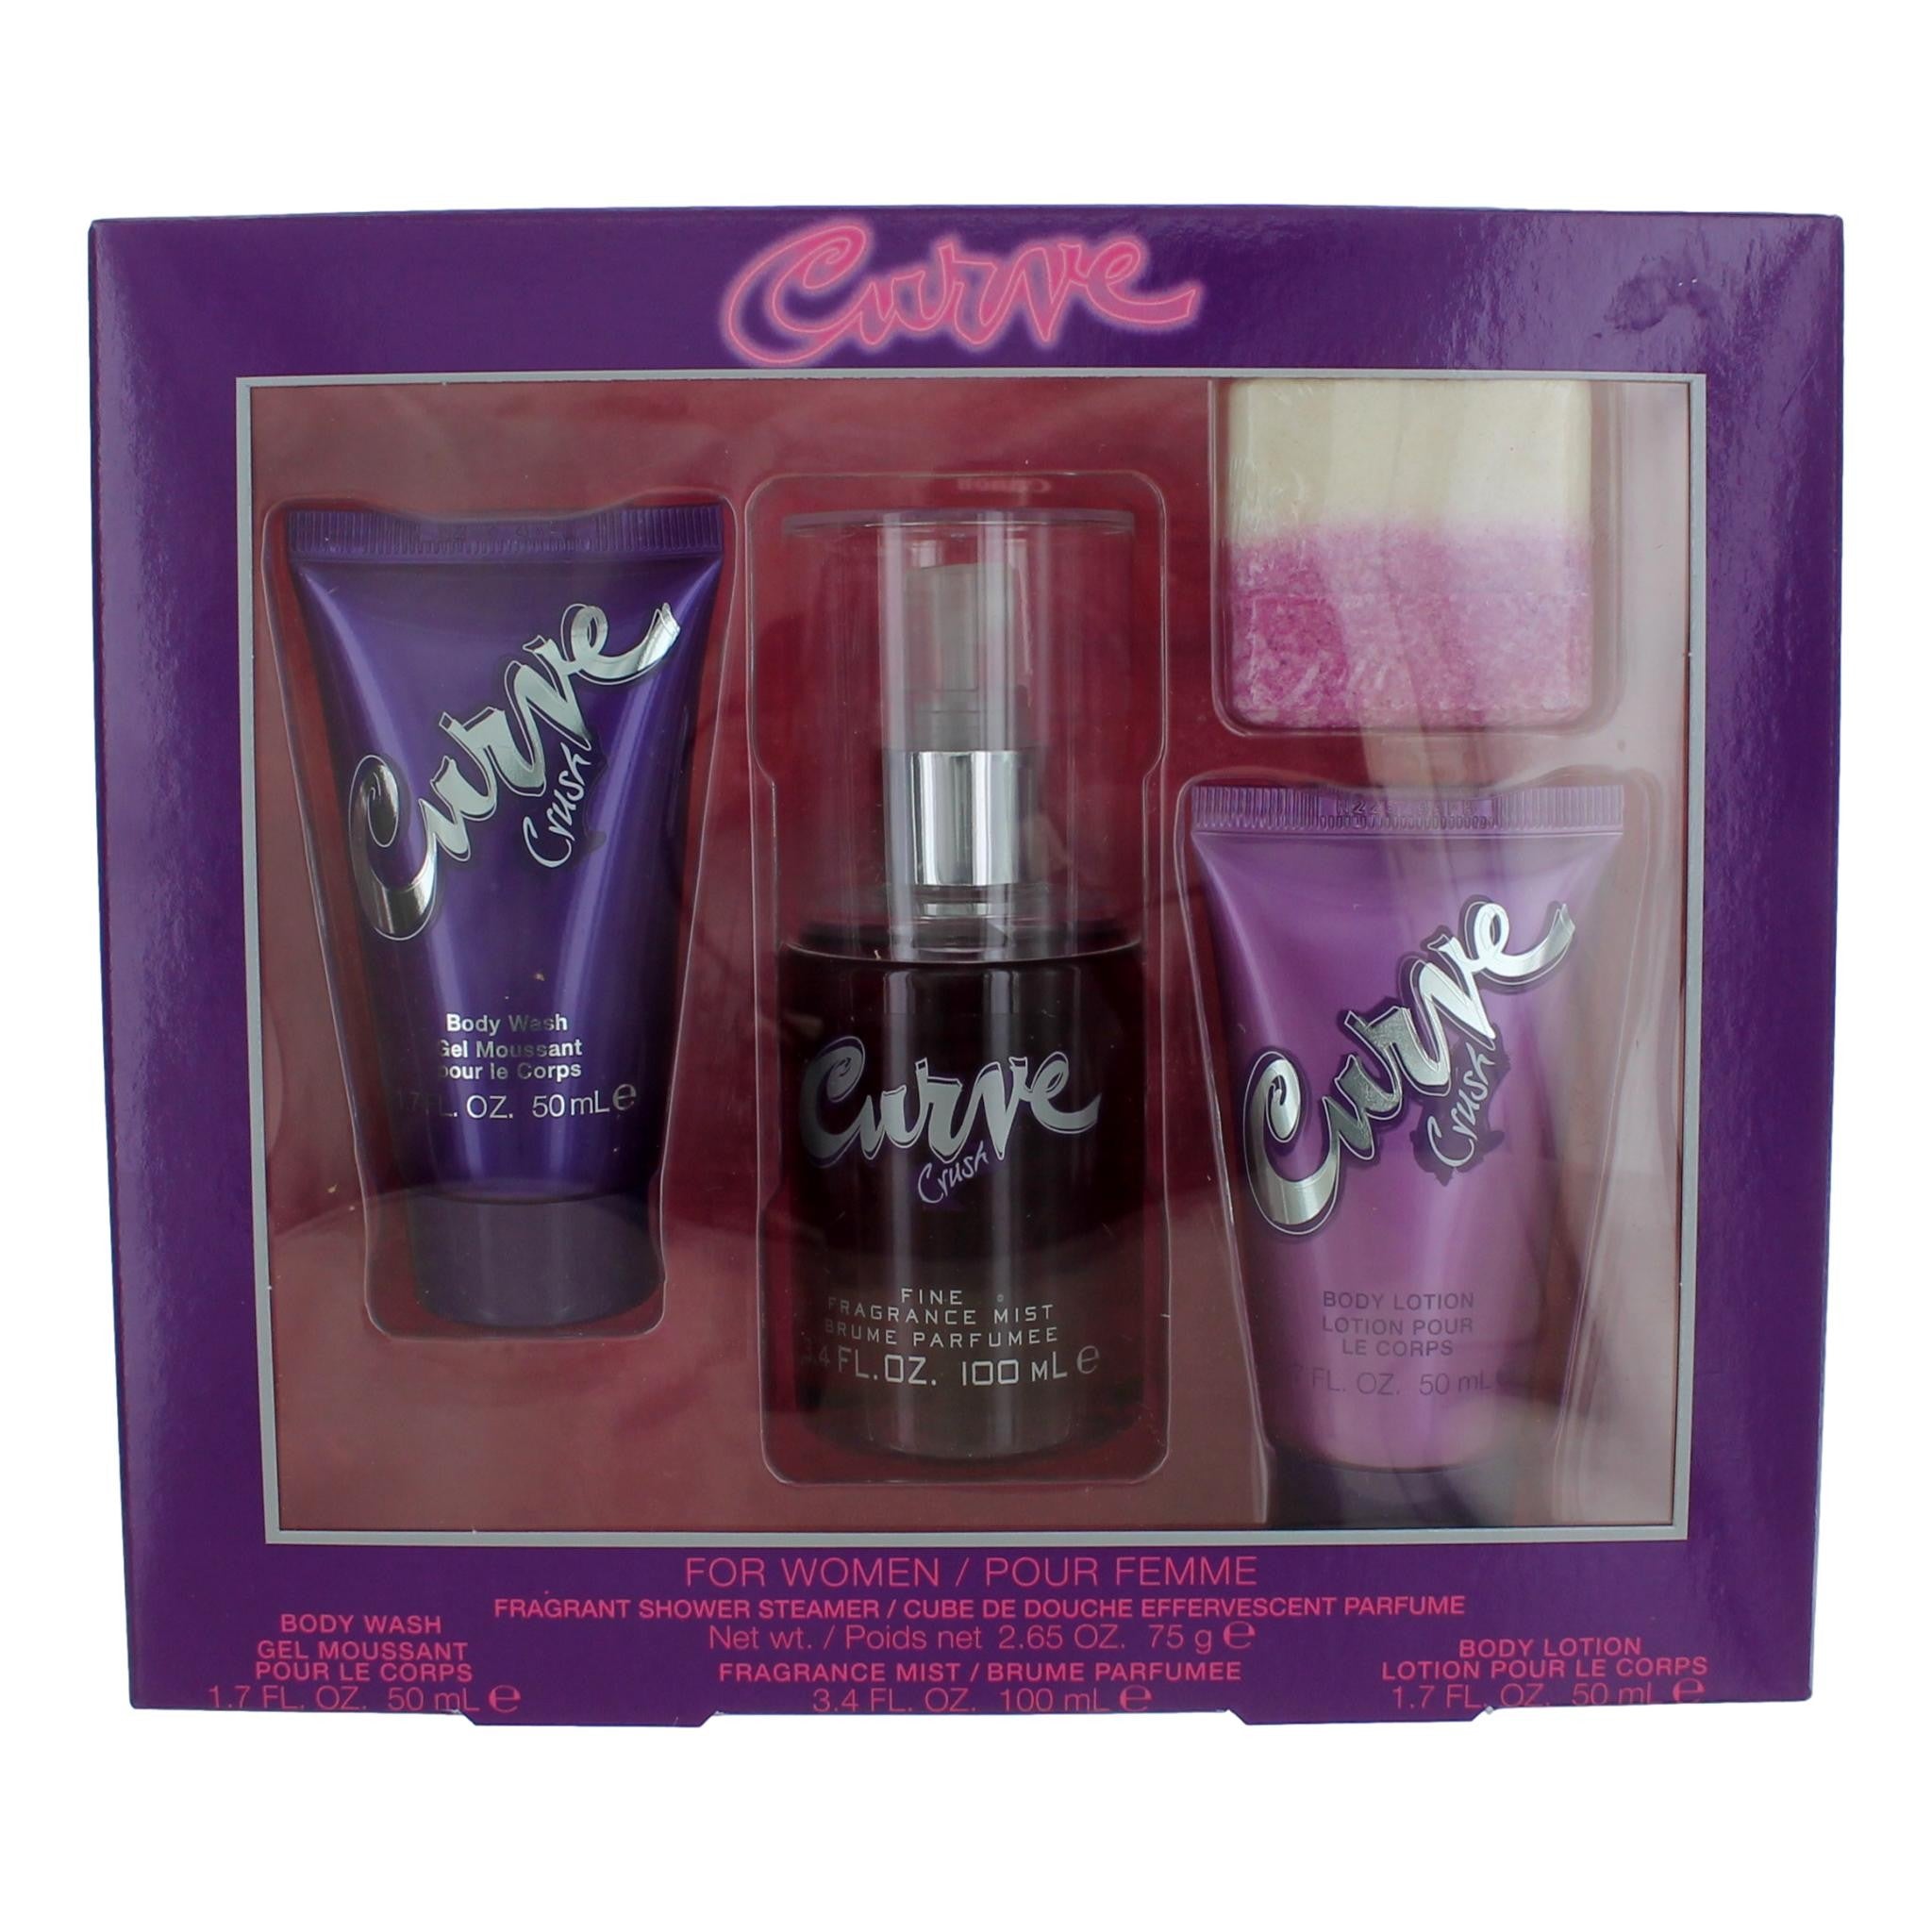 Bottle of Curve Crush by Liz Claiborne, 4 Piece Gift Set for Women